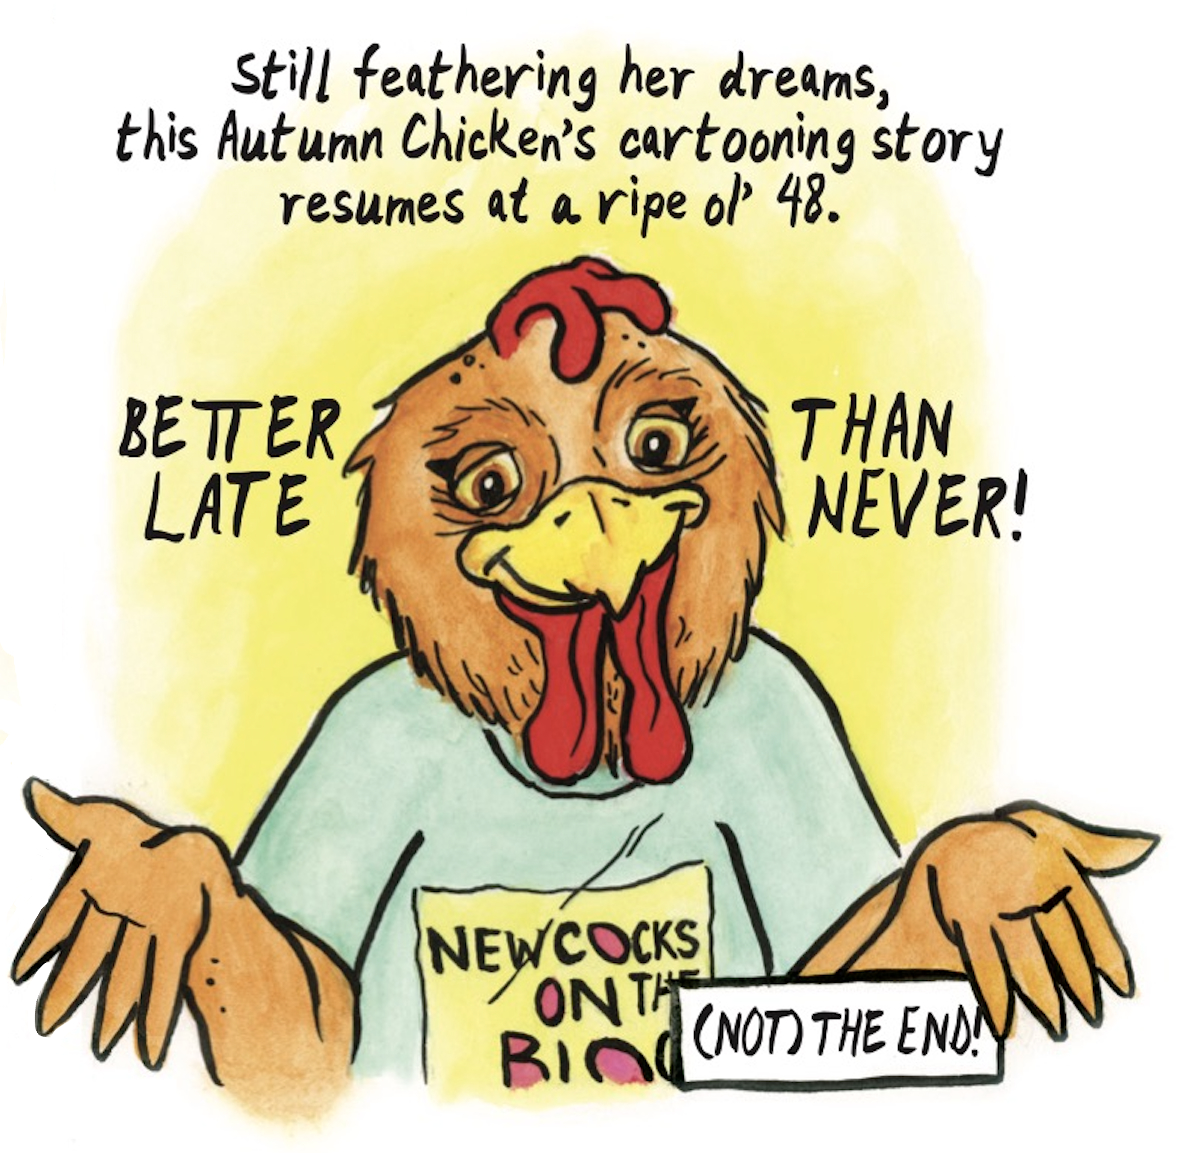 â€œStill feathering her dreams, this Autumn Chickenâ€™s cartooning story resumes at a ripe olâ€™ 48. Better late than never! (Not) the end!â€ The chicken looks at the viewer, shrugging and smiling with her head tilted to the side.